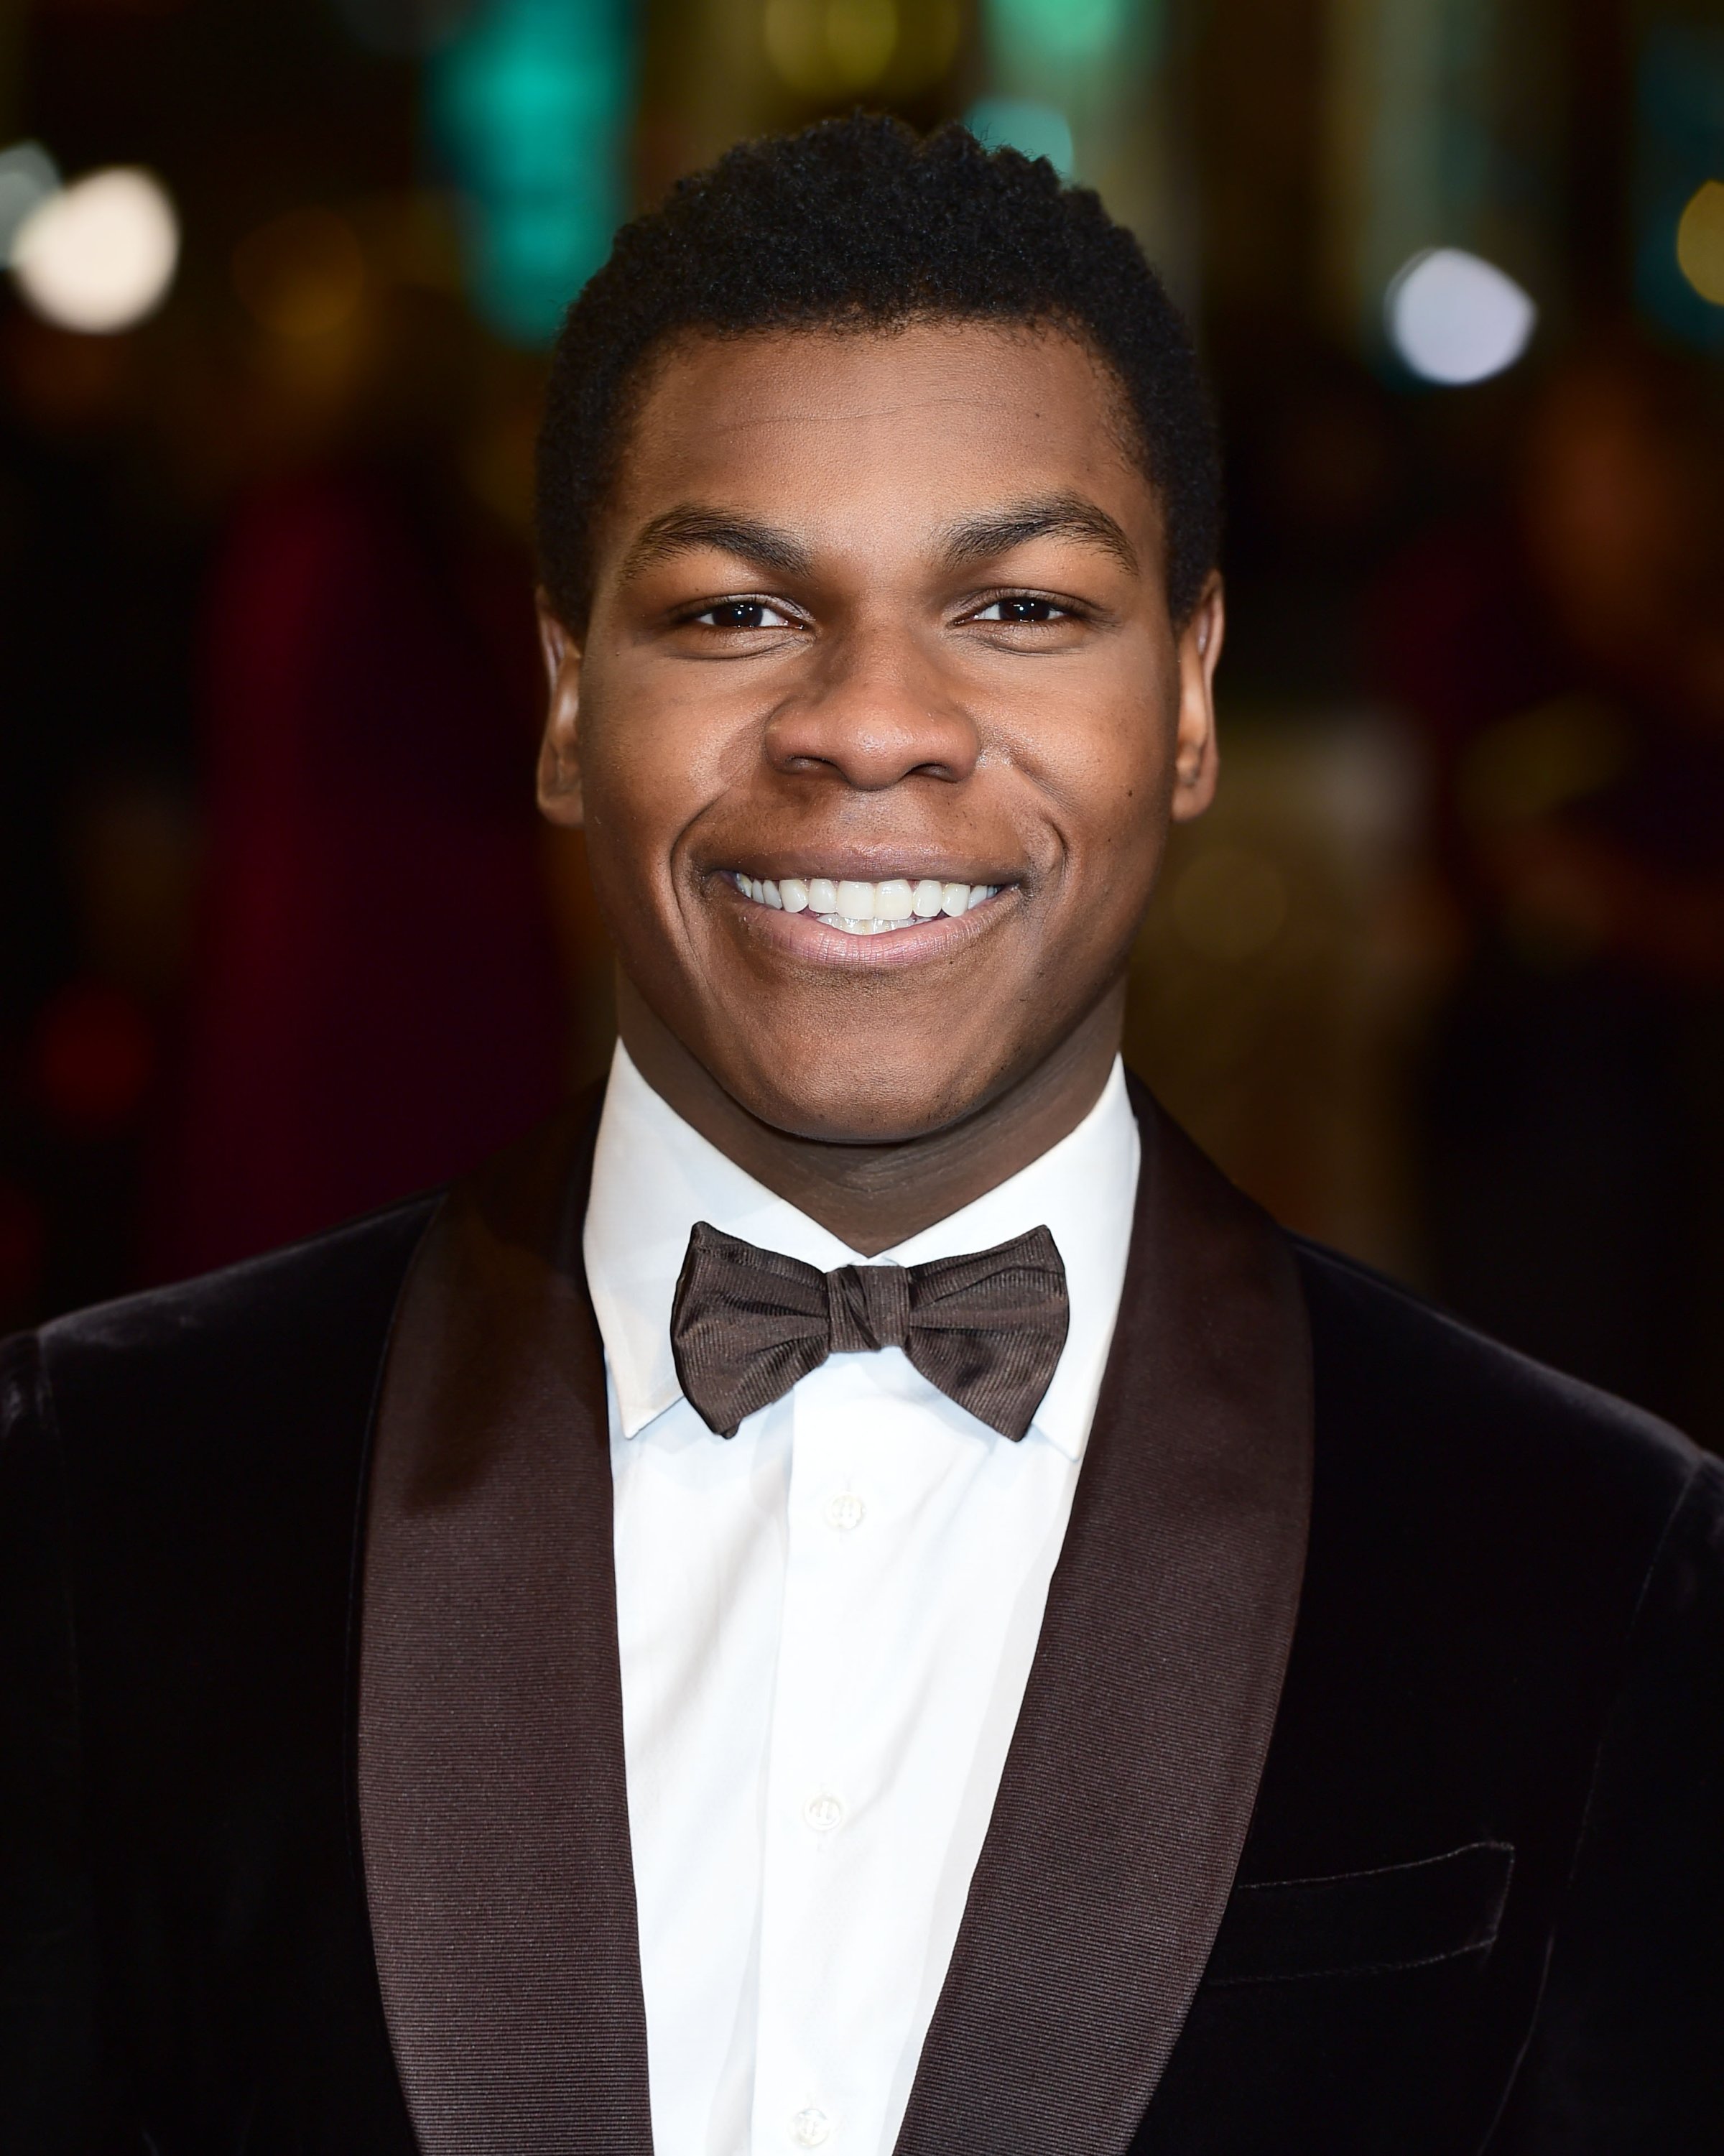 John Boyega revealed that he found a much-coveted Pikachu when filming Star Wars: Episode VIII